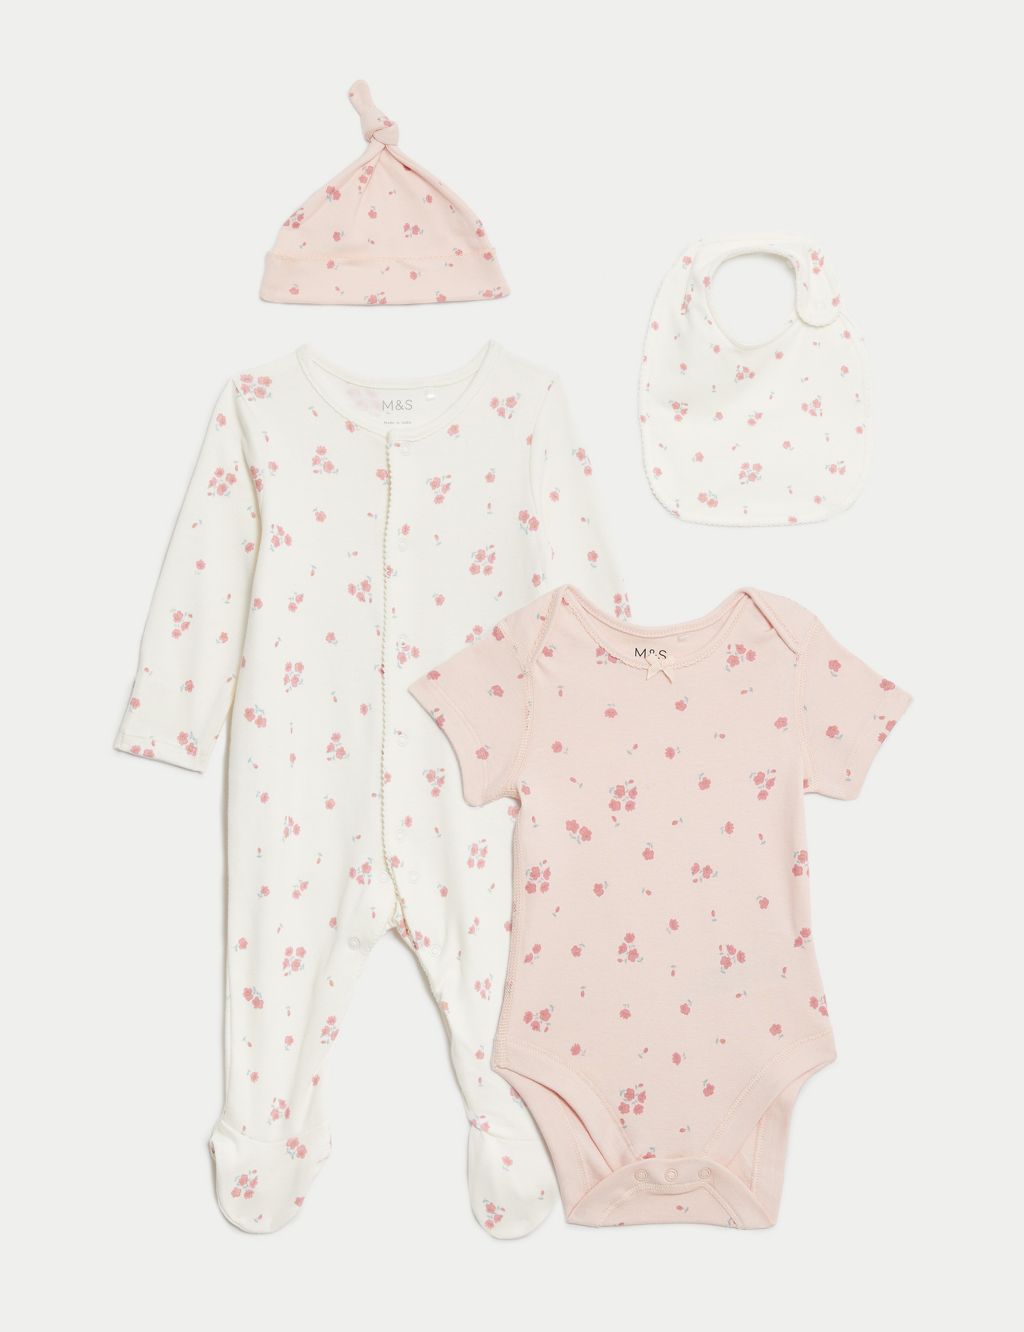 4pc Pure Cotton Floral Starter Set (7lbs-1 Yrs) image 1